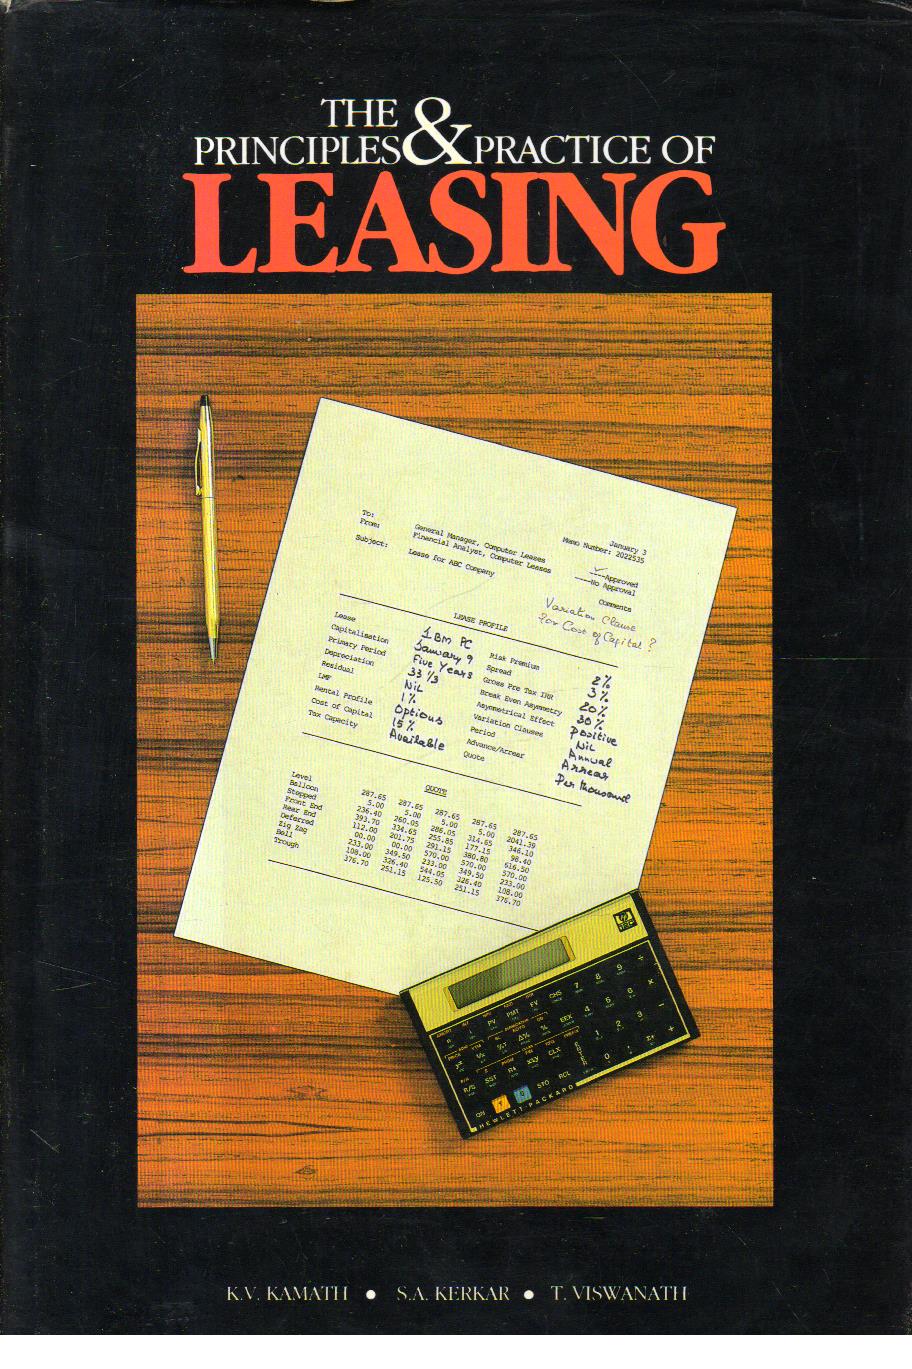 The Principles and Practice of Leasing.